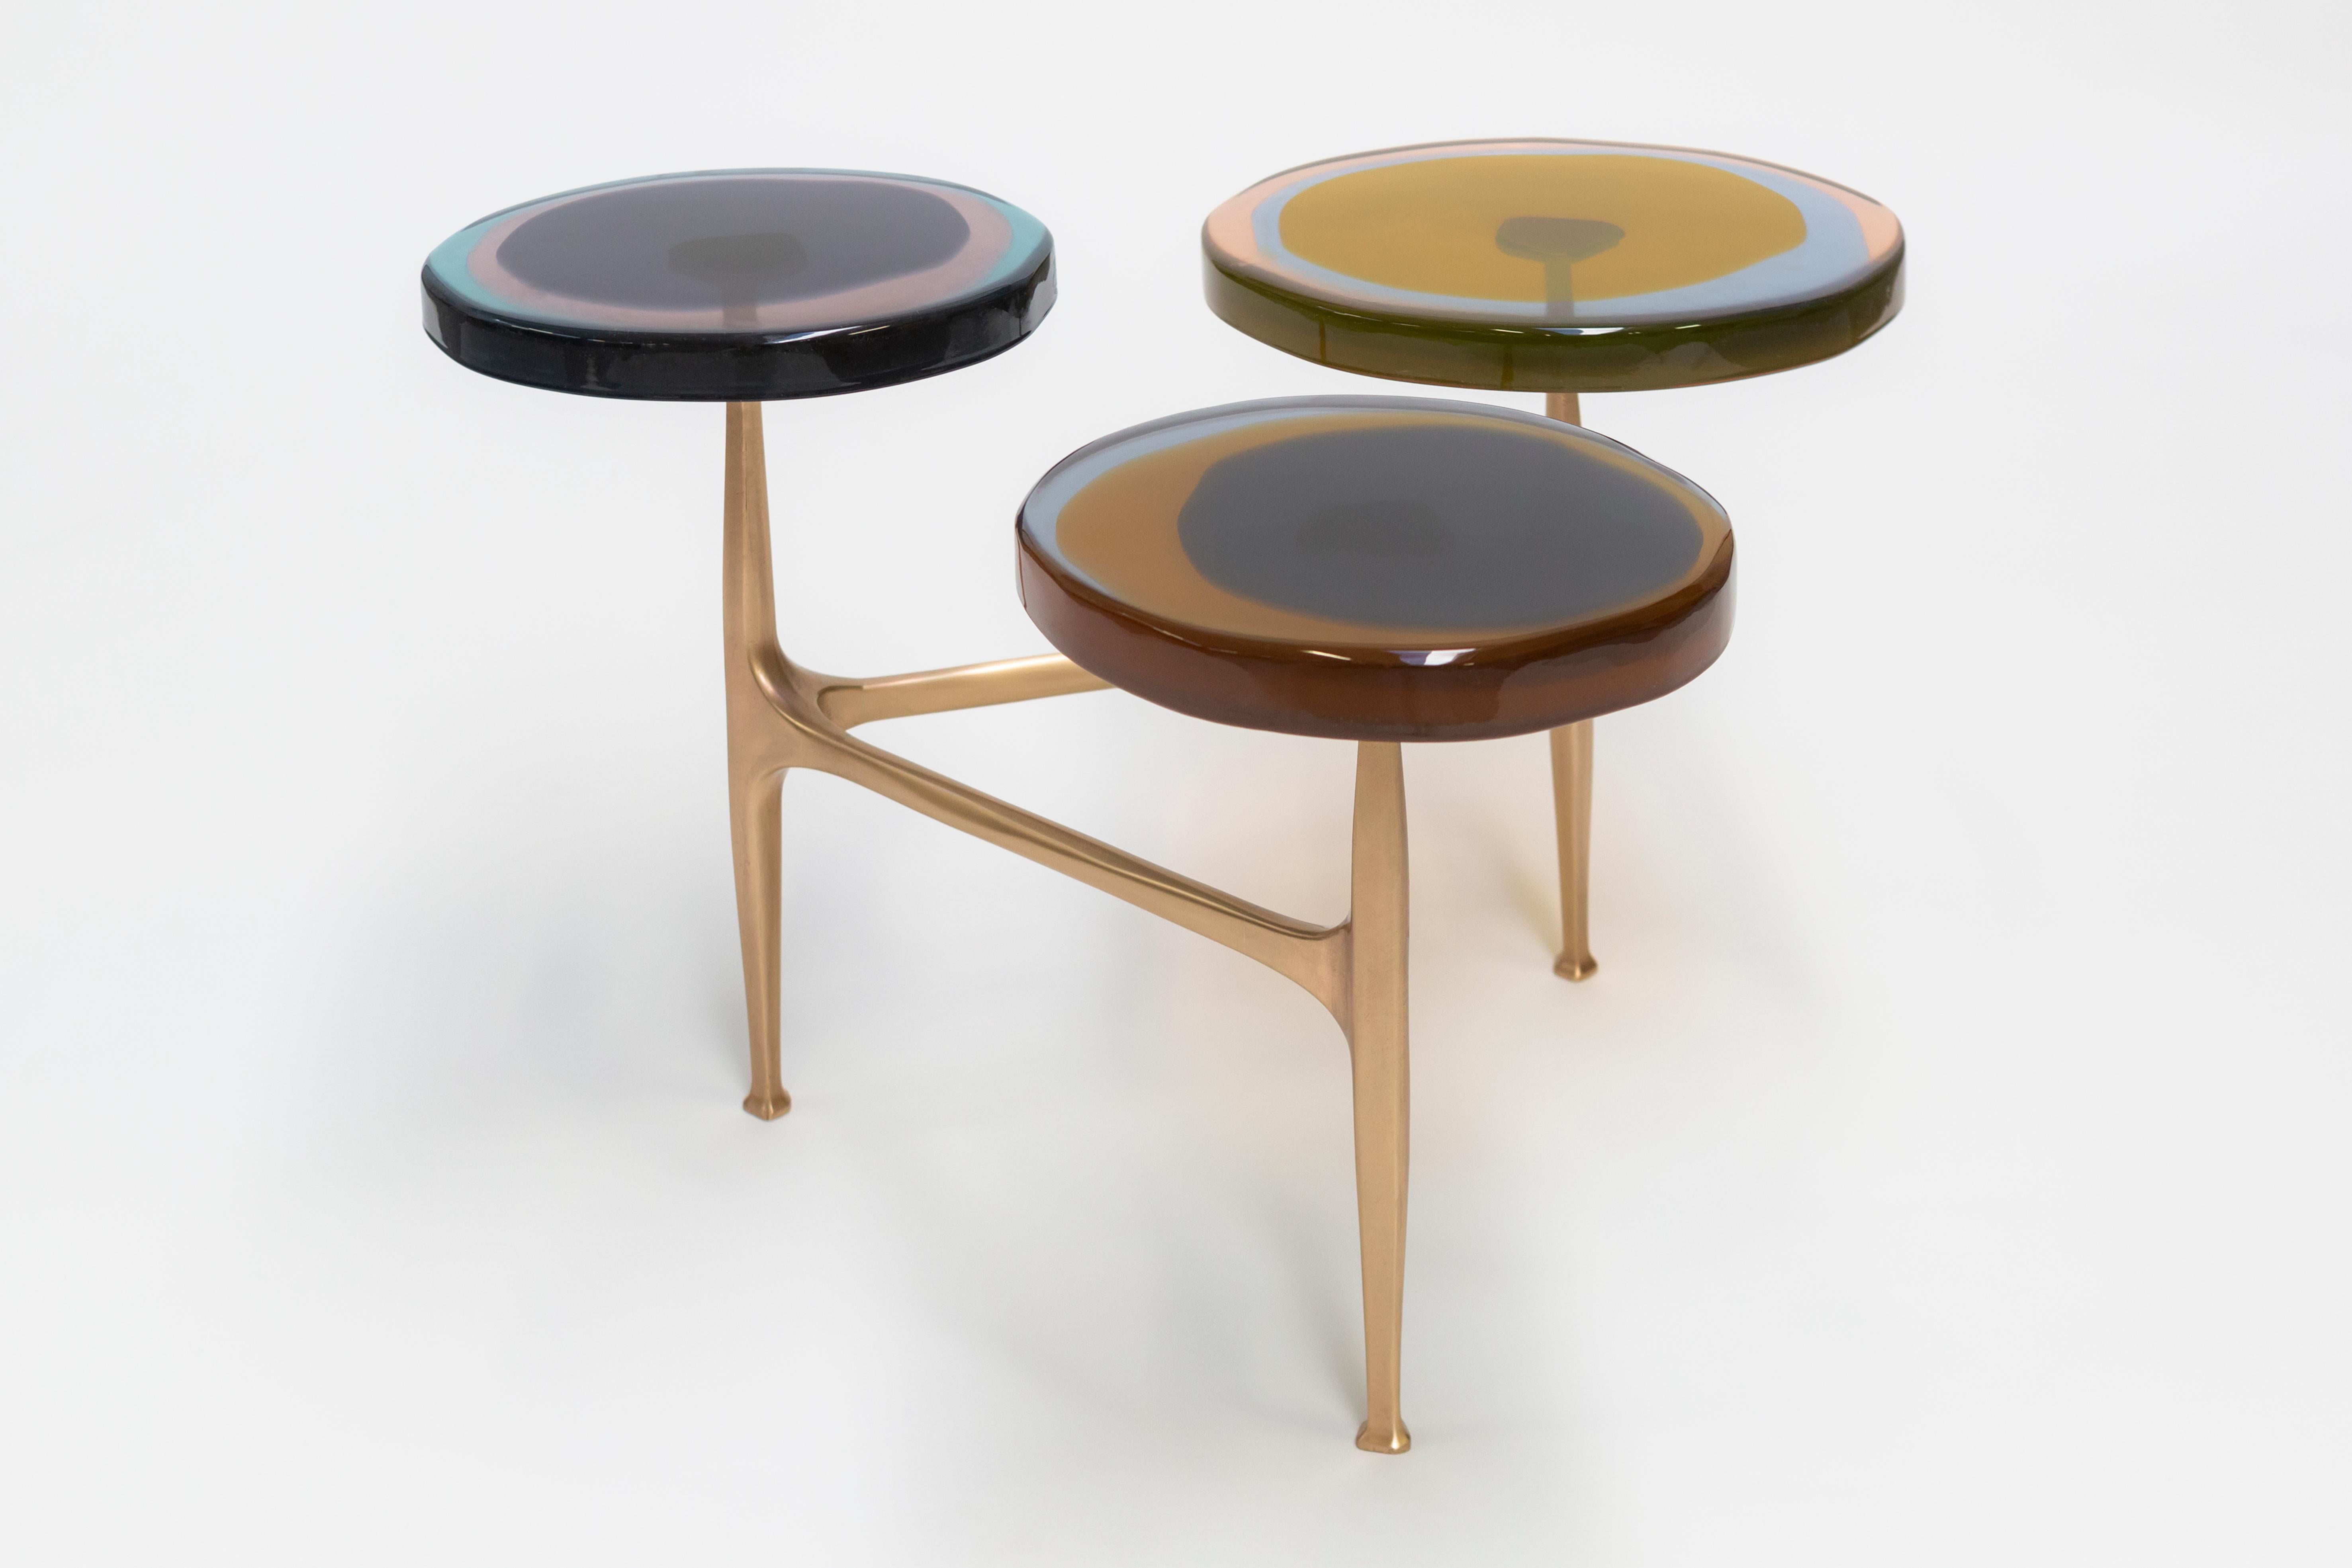 Agatha Coffe Table 3 by Draga & Aurel Resin and Bronze, 21st Century In New Condition For Sale In Como, IT